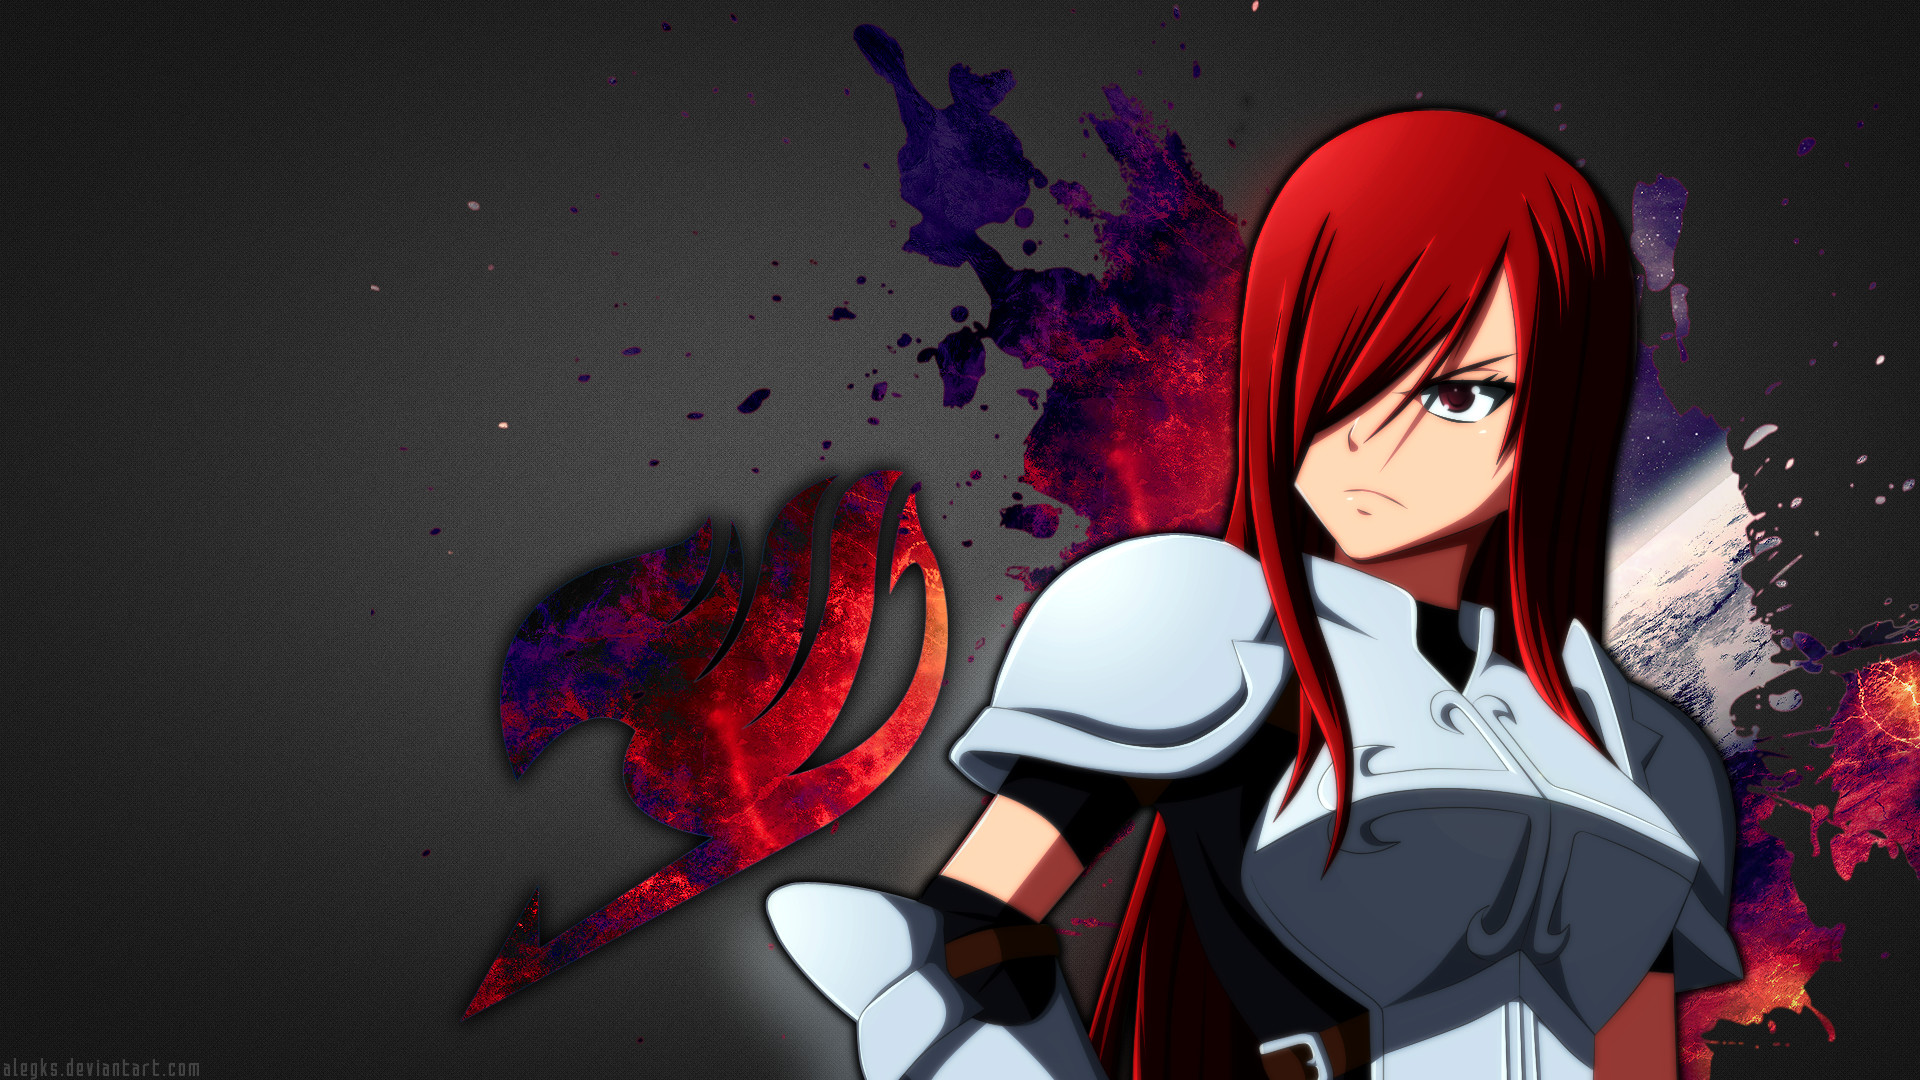 1920x1080 ... Erza Scarlet [Fairy Tail Wallpaper] by alegks